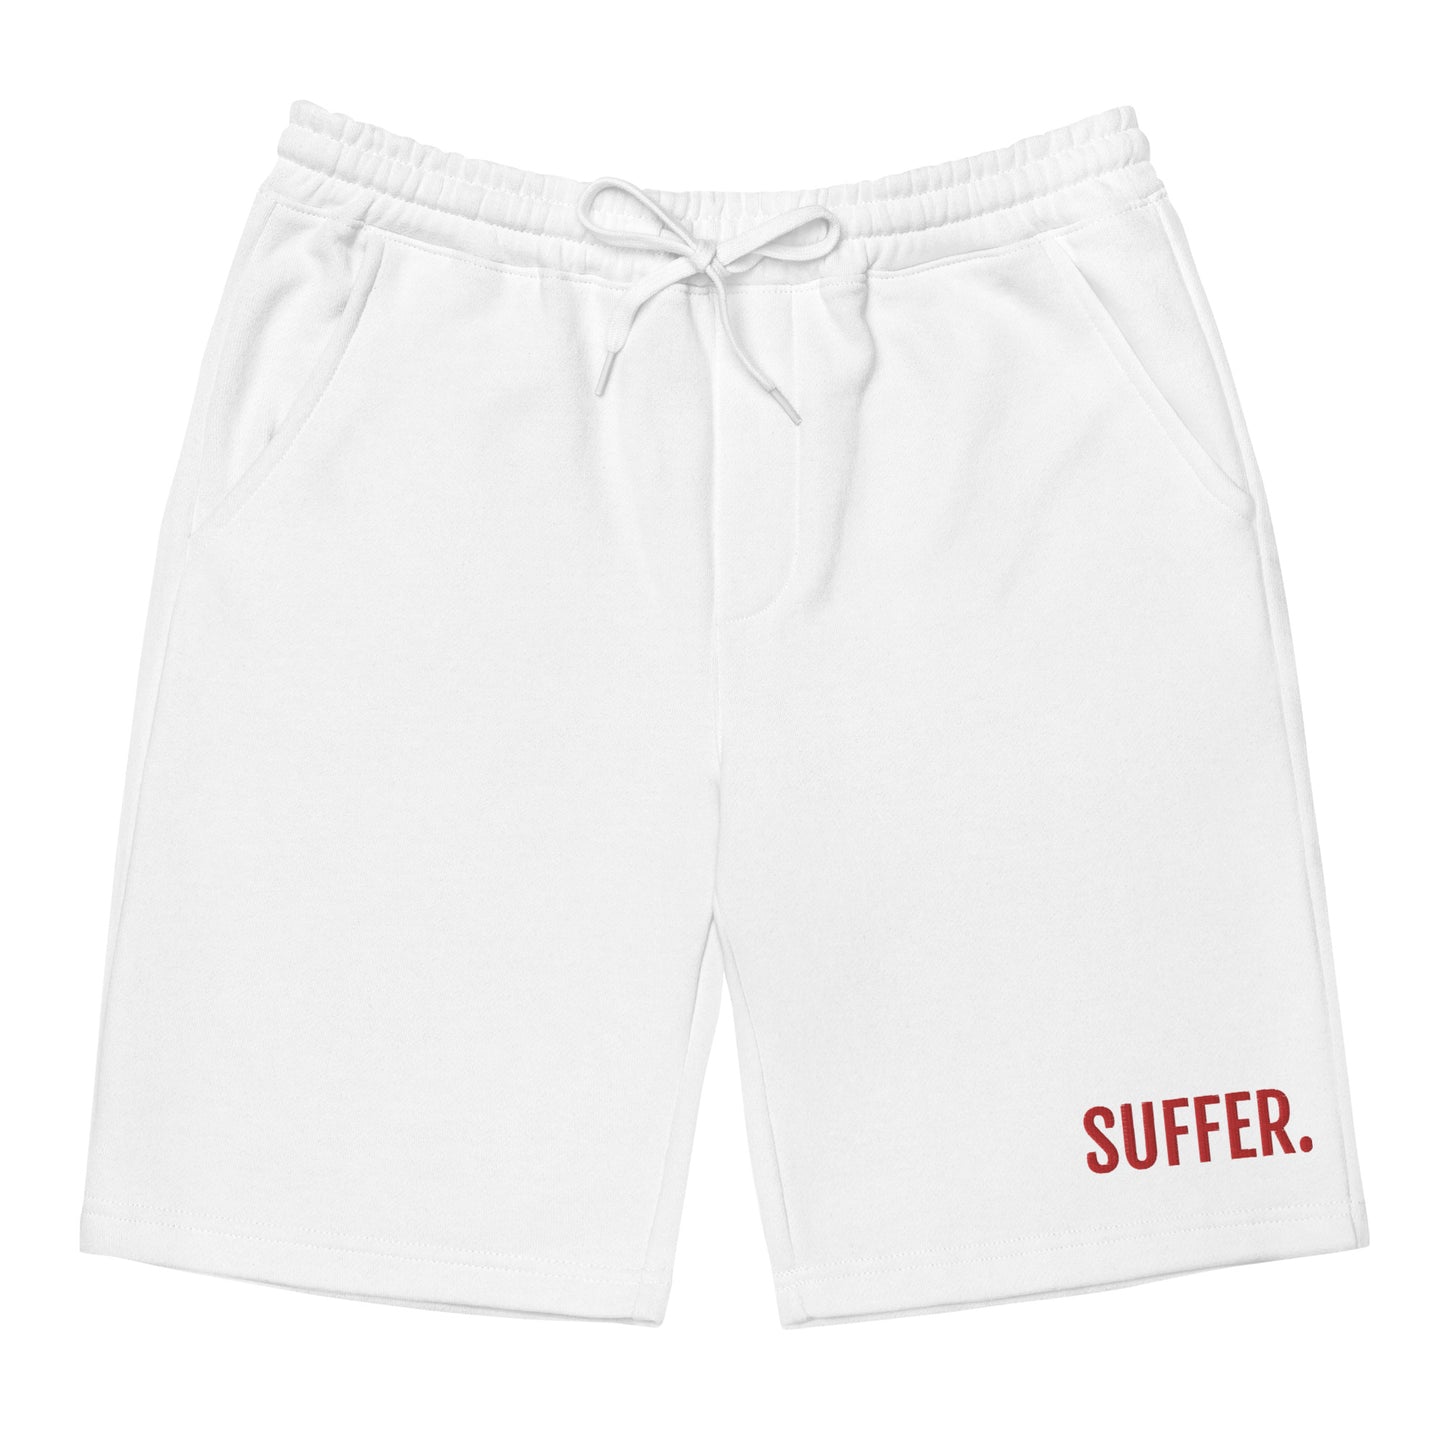 SUFFER RED Embroidered Fleece Shorts